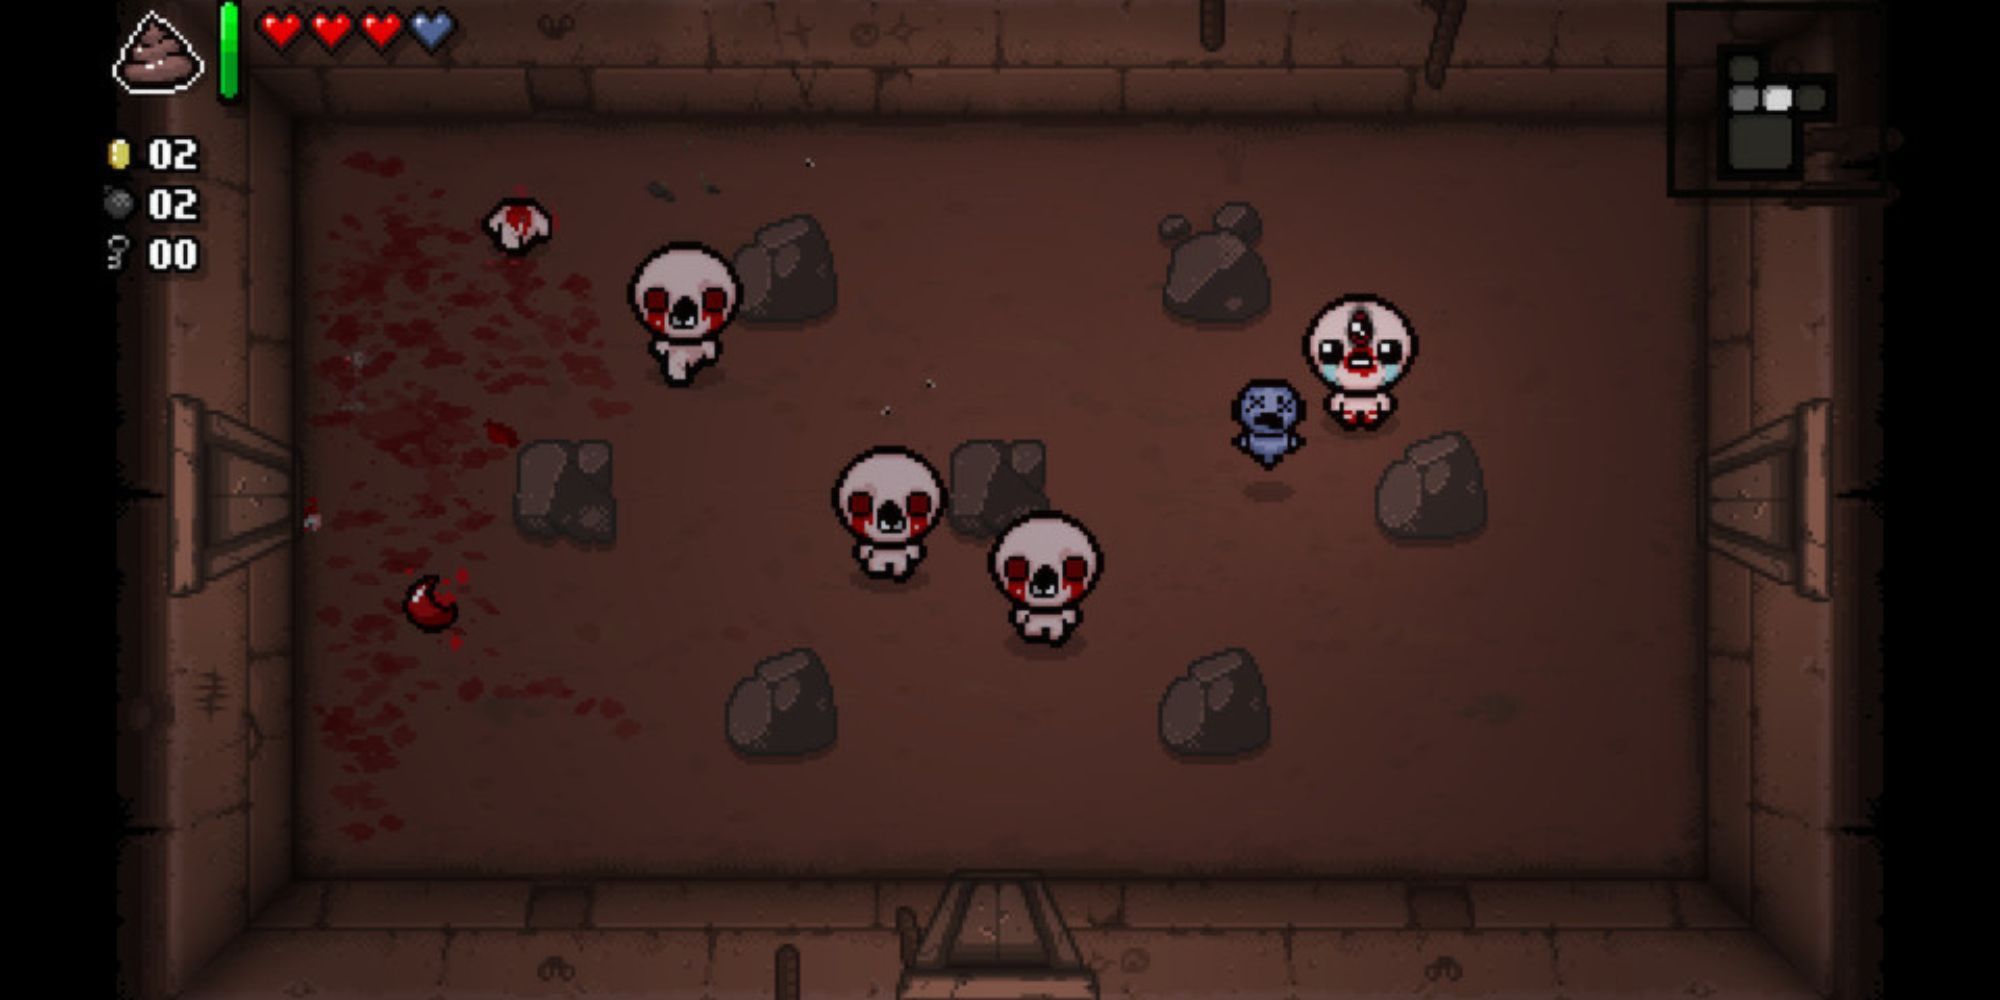 Isaac is chased by four enemies in a small room